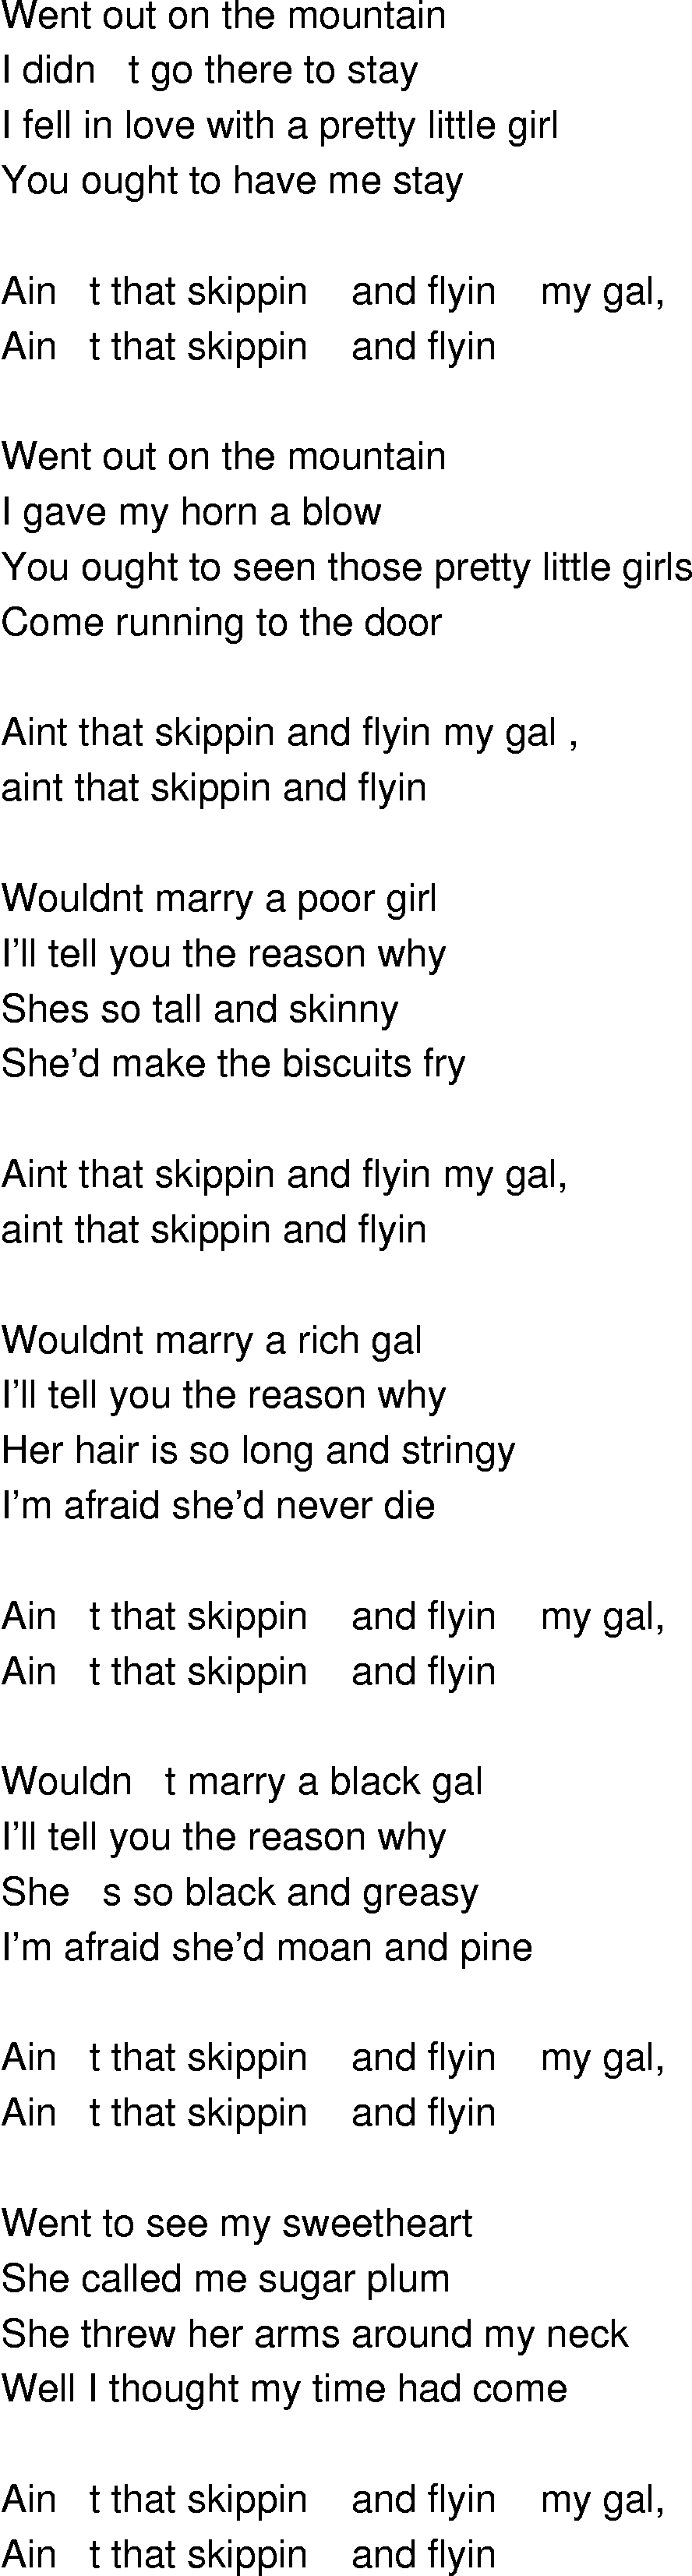 Old-Time (oldtimey) Song Lyrics - aint that skippin and flyin